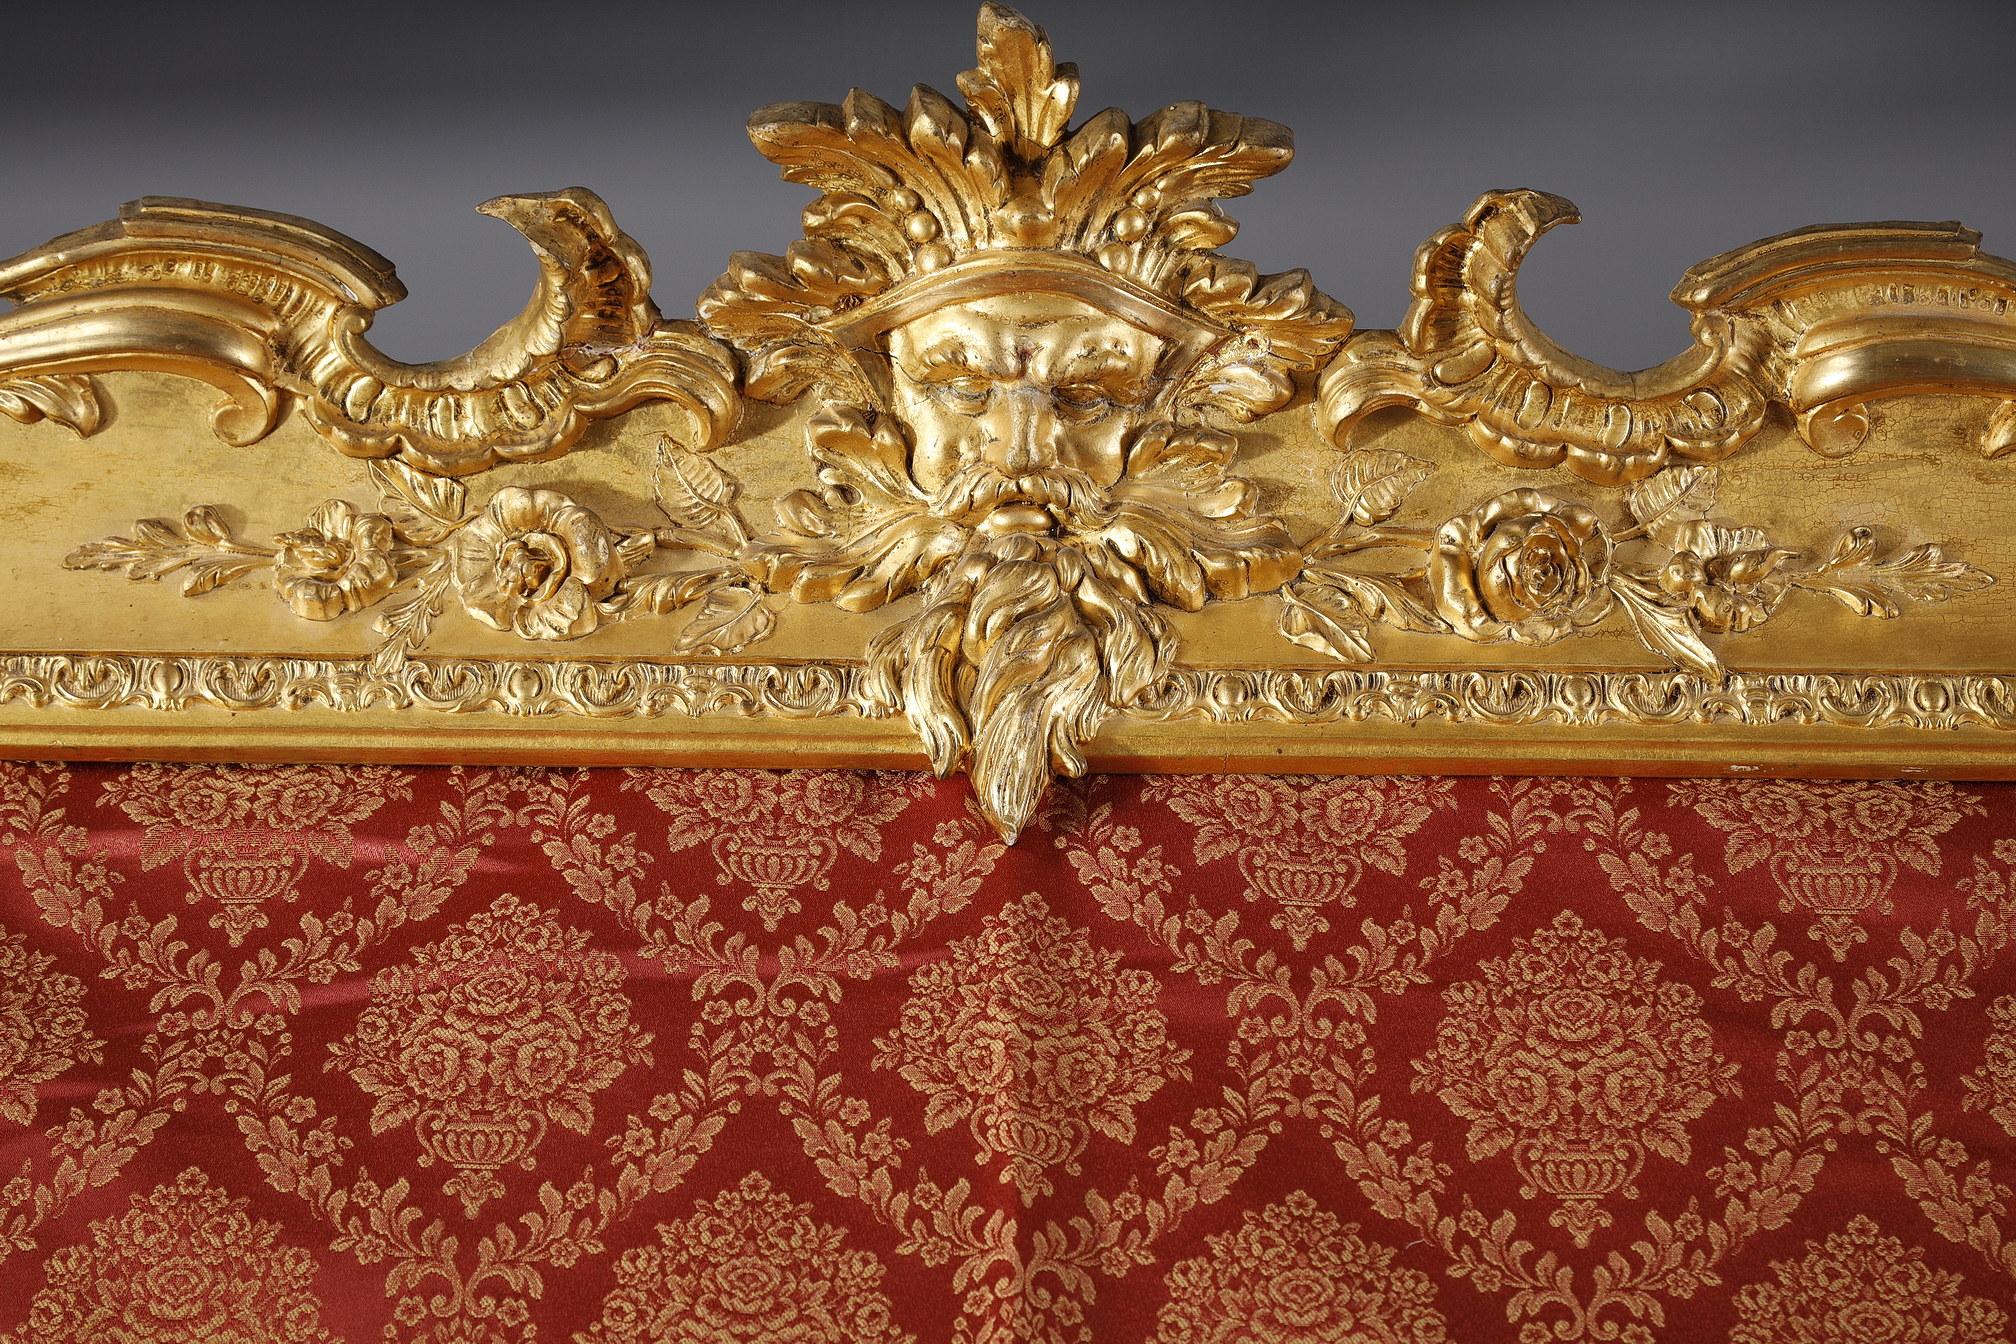 19th Century Pair of Curtains and Valance in Red Brocade with Gilded Wood Railing